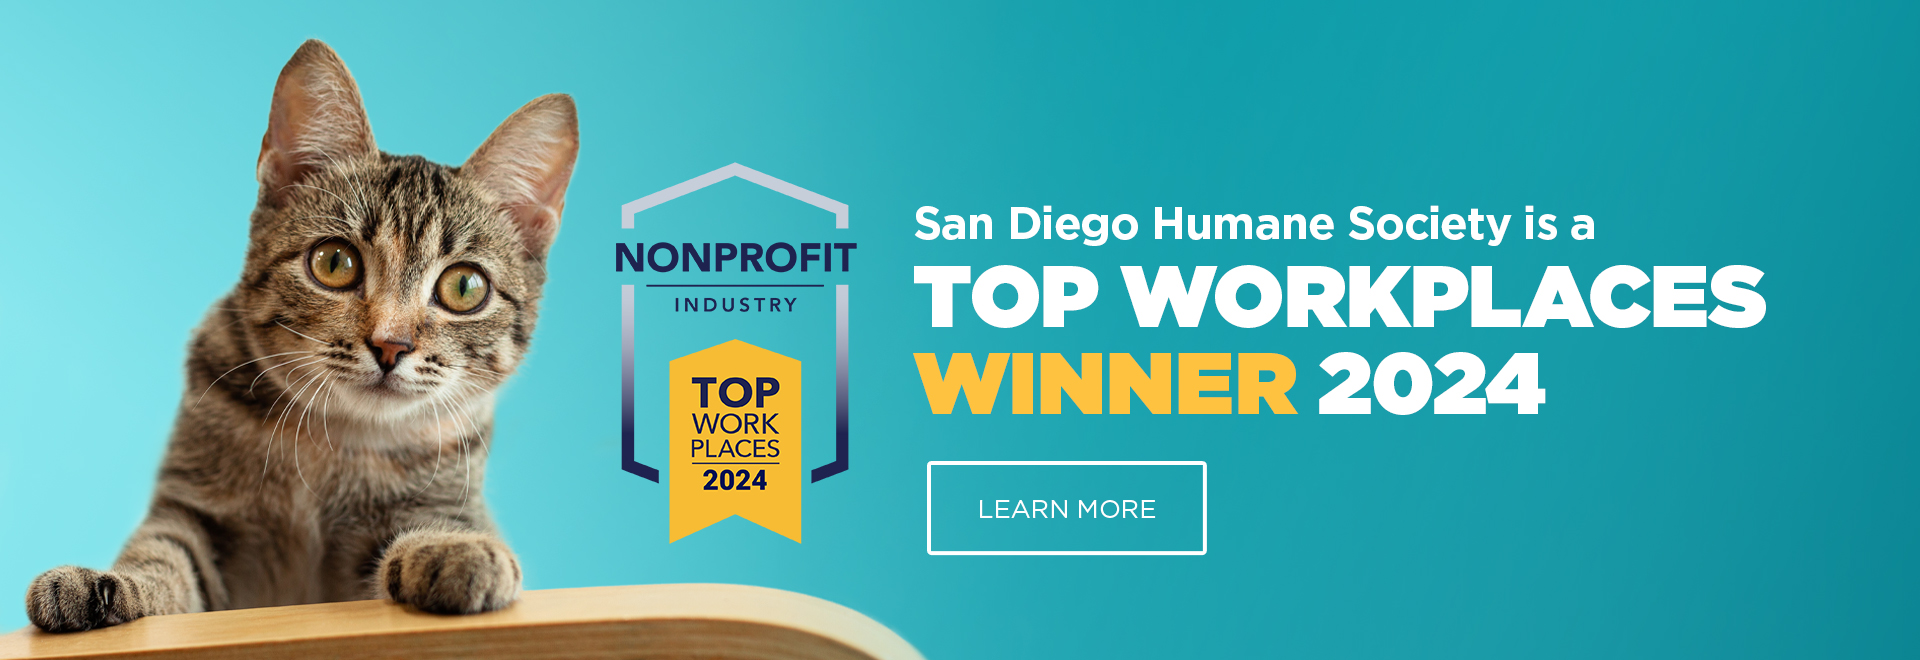 San Diego Humane Society is a Top Workplace Winner 2024 | Learn More